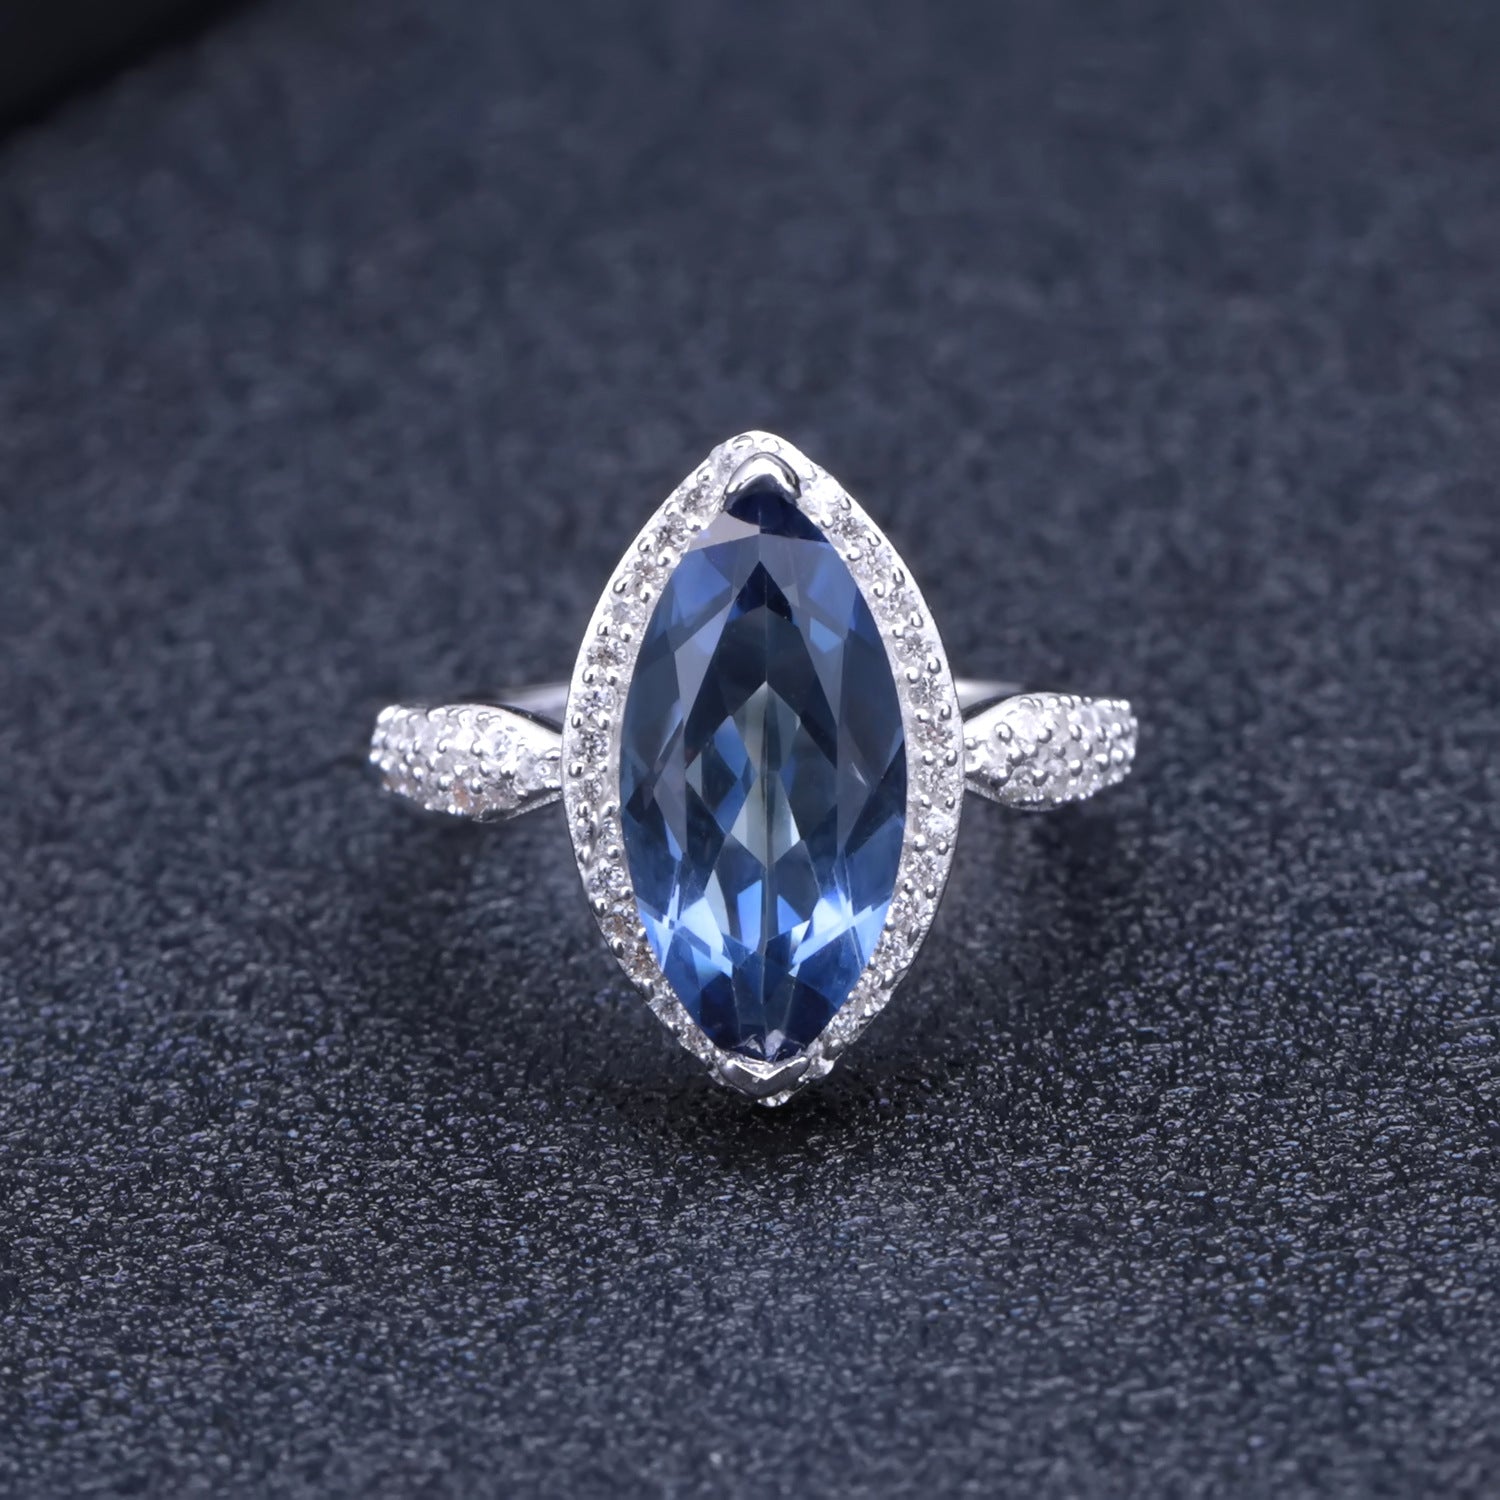 European Fashion Style Inlaid Natural Gemstone Marquise Silver Ring for Women